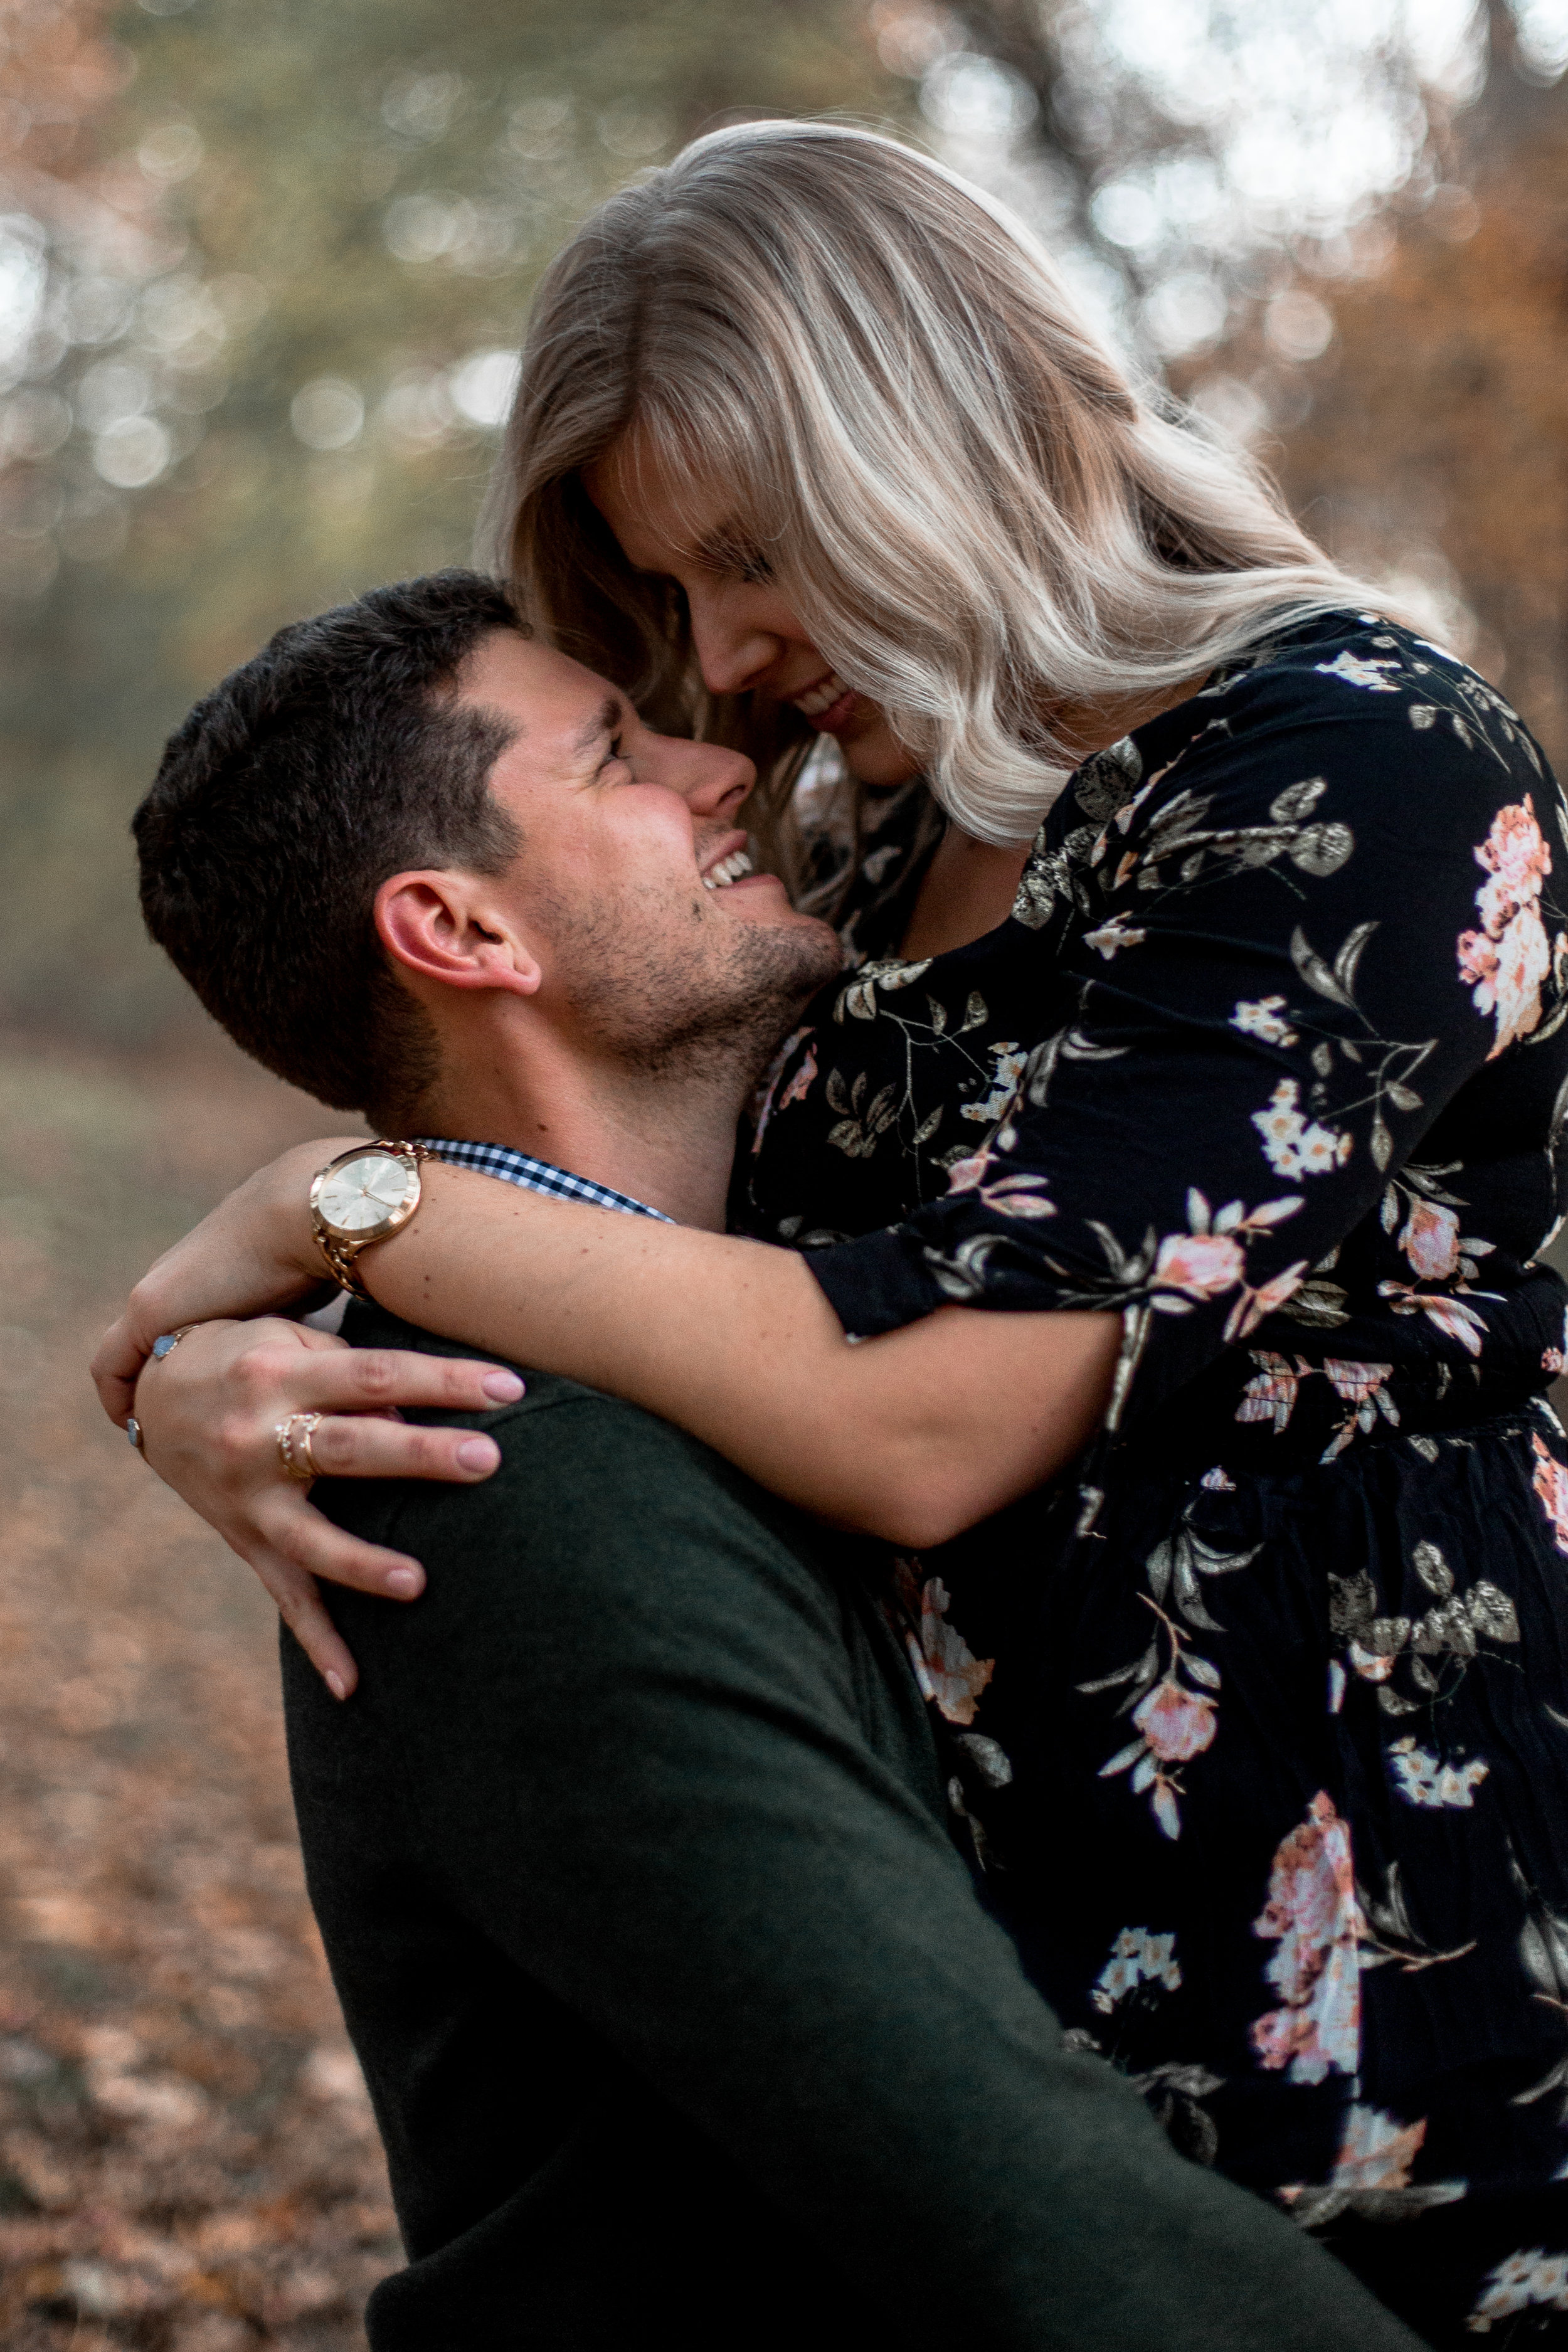 nicole-daacke-photography-carefree-bohemian-lancaster-pa-pennsylvania-engagement-photos-engagement-session-golden-sunset-adventure-session-in-lancaster-pa-lancaster-pa-outdoor-wedding-photographer-50.jpg